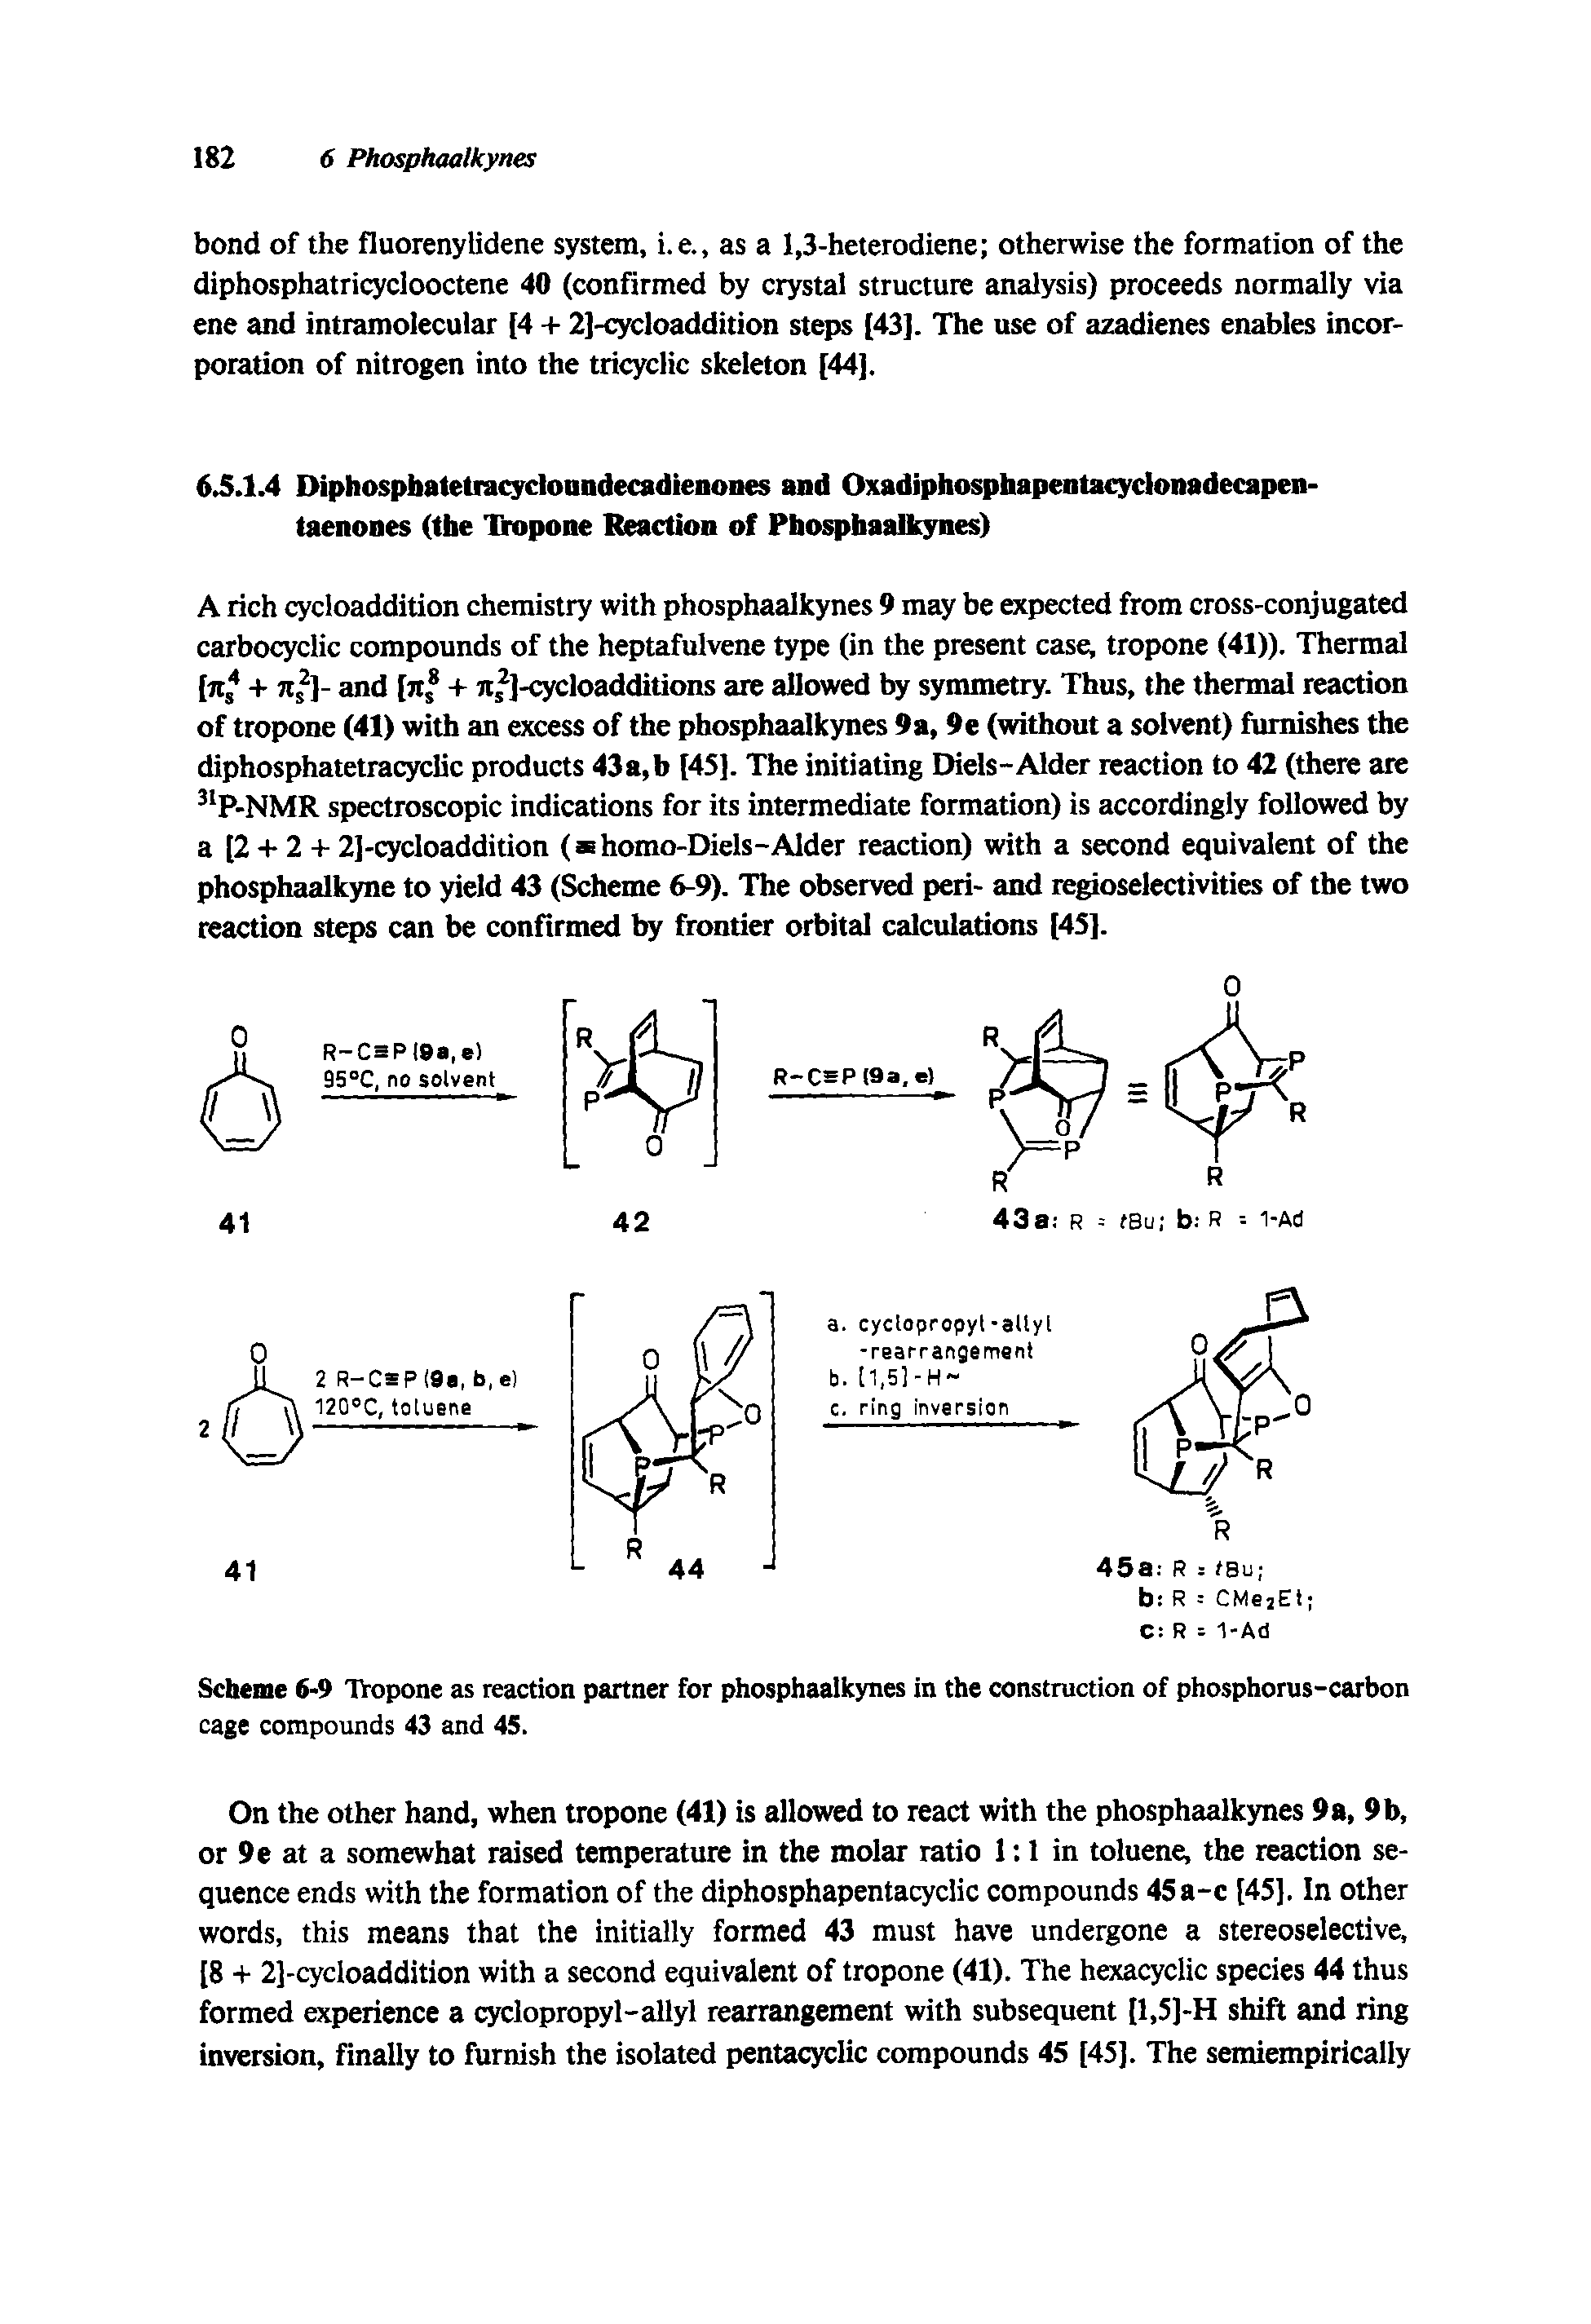 Scheme 6-9 IVopone as reaction partner for phosphaalkynes in the construction of phosphorus-carbon cage compounds 43 and 45.